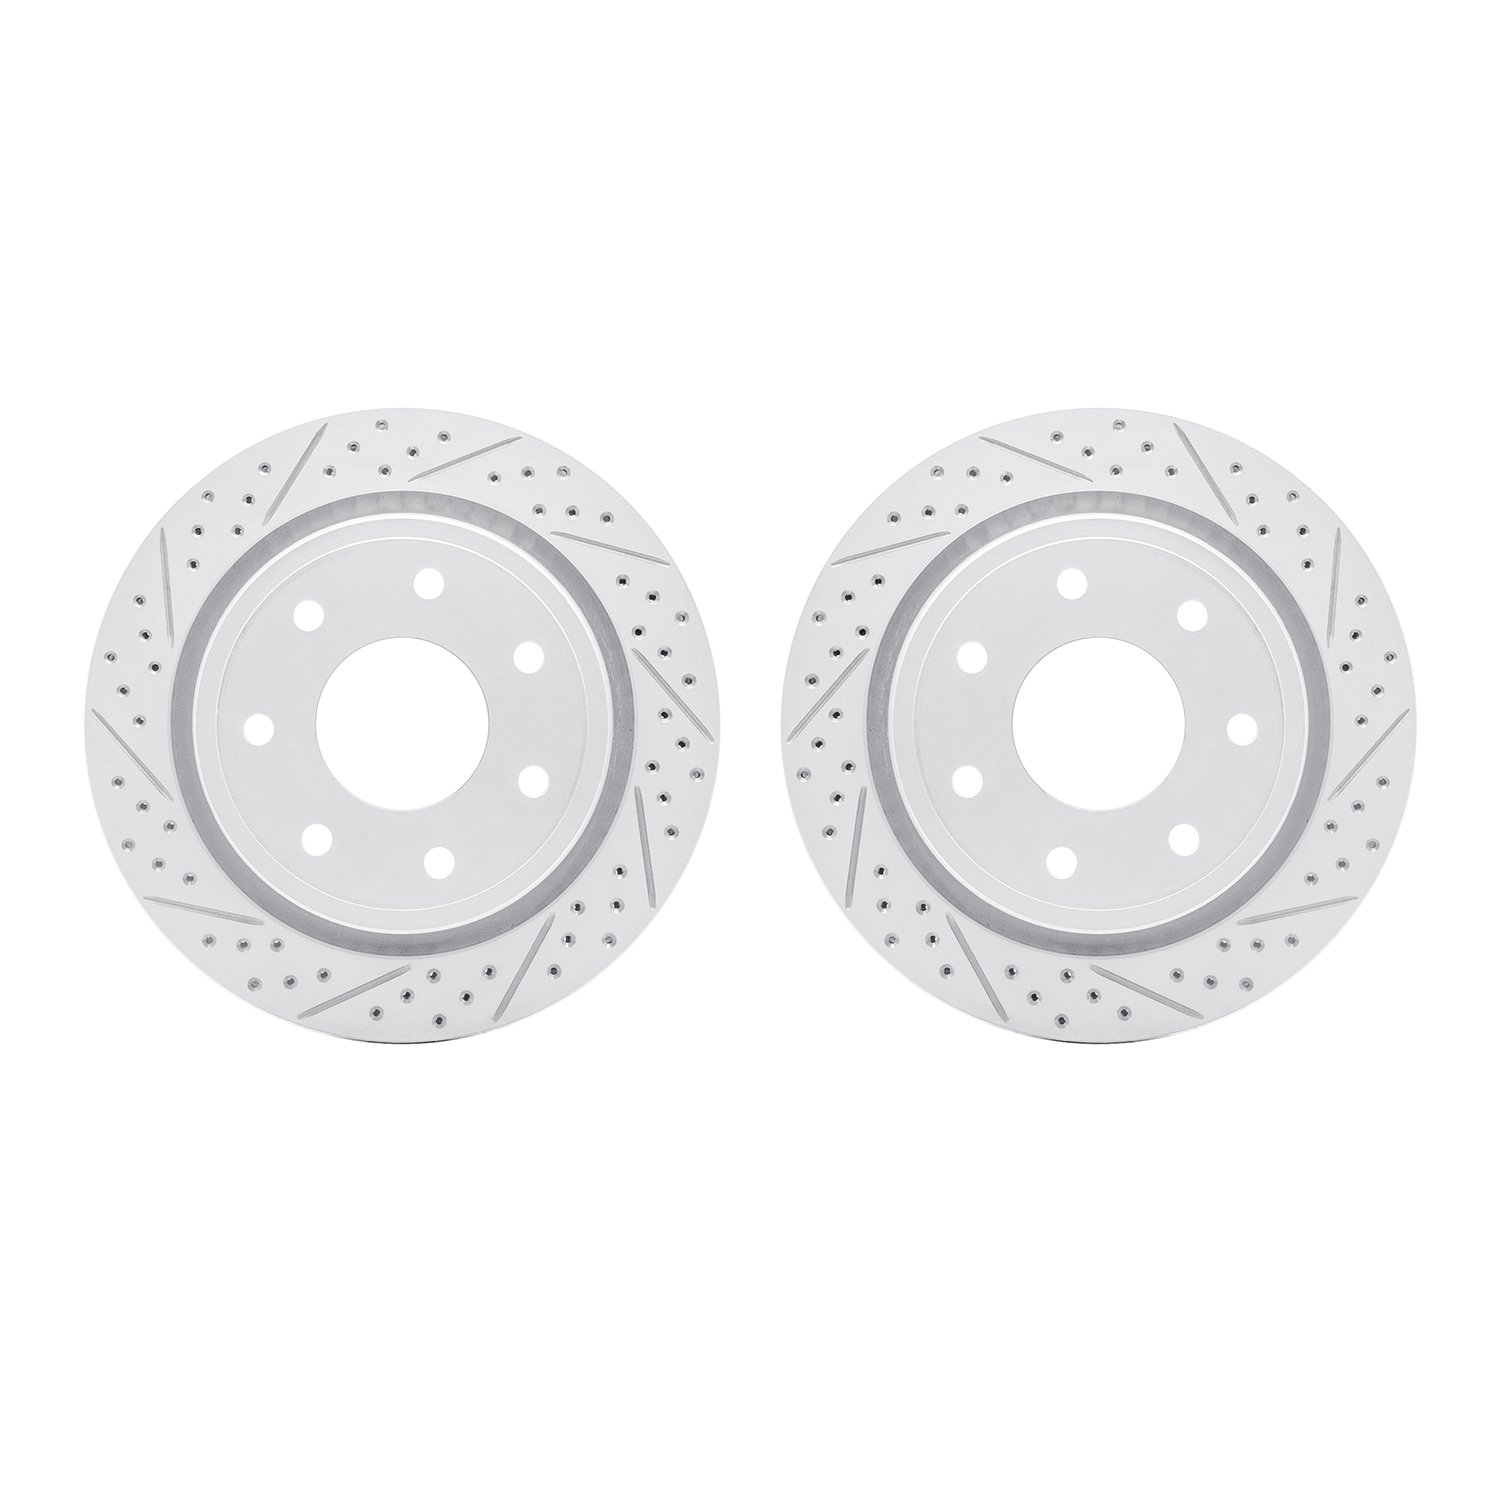 2002-54149 Geoperformance Drilled/Slotted Brake Rotors, 2012-2014 Ford/Lincoln/Mercury/Mazda, Position: Rear